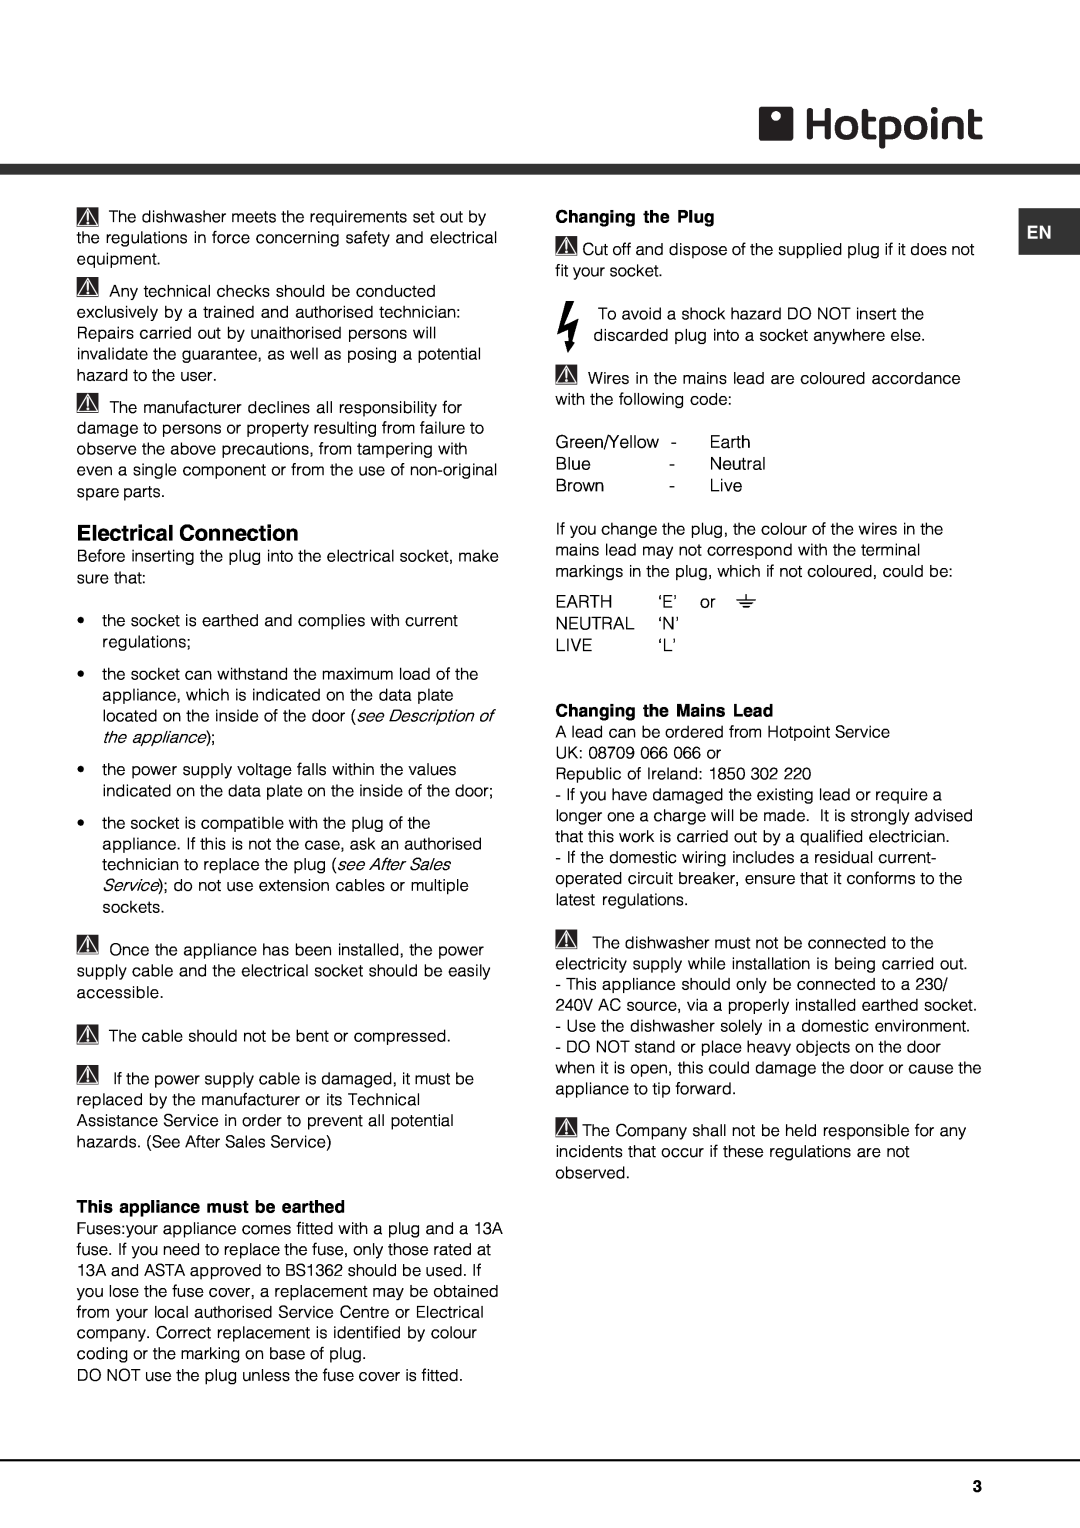 Hotpoint FDM550PR manual Electrical Connection 